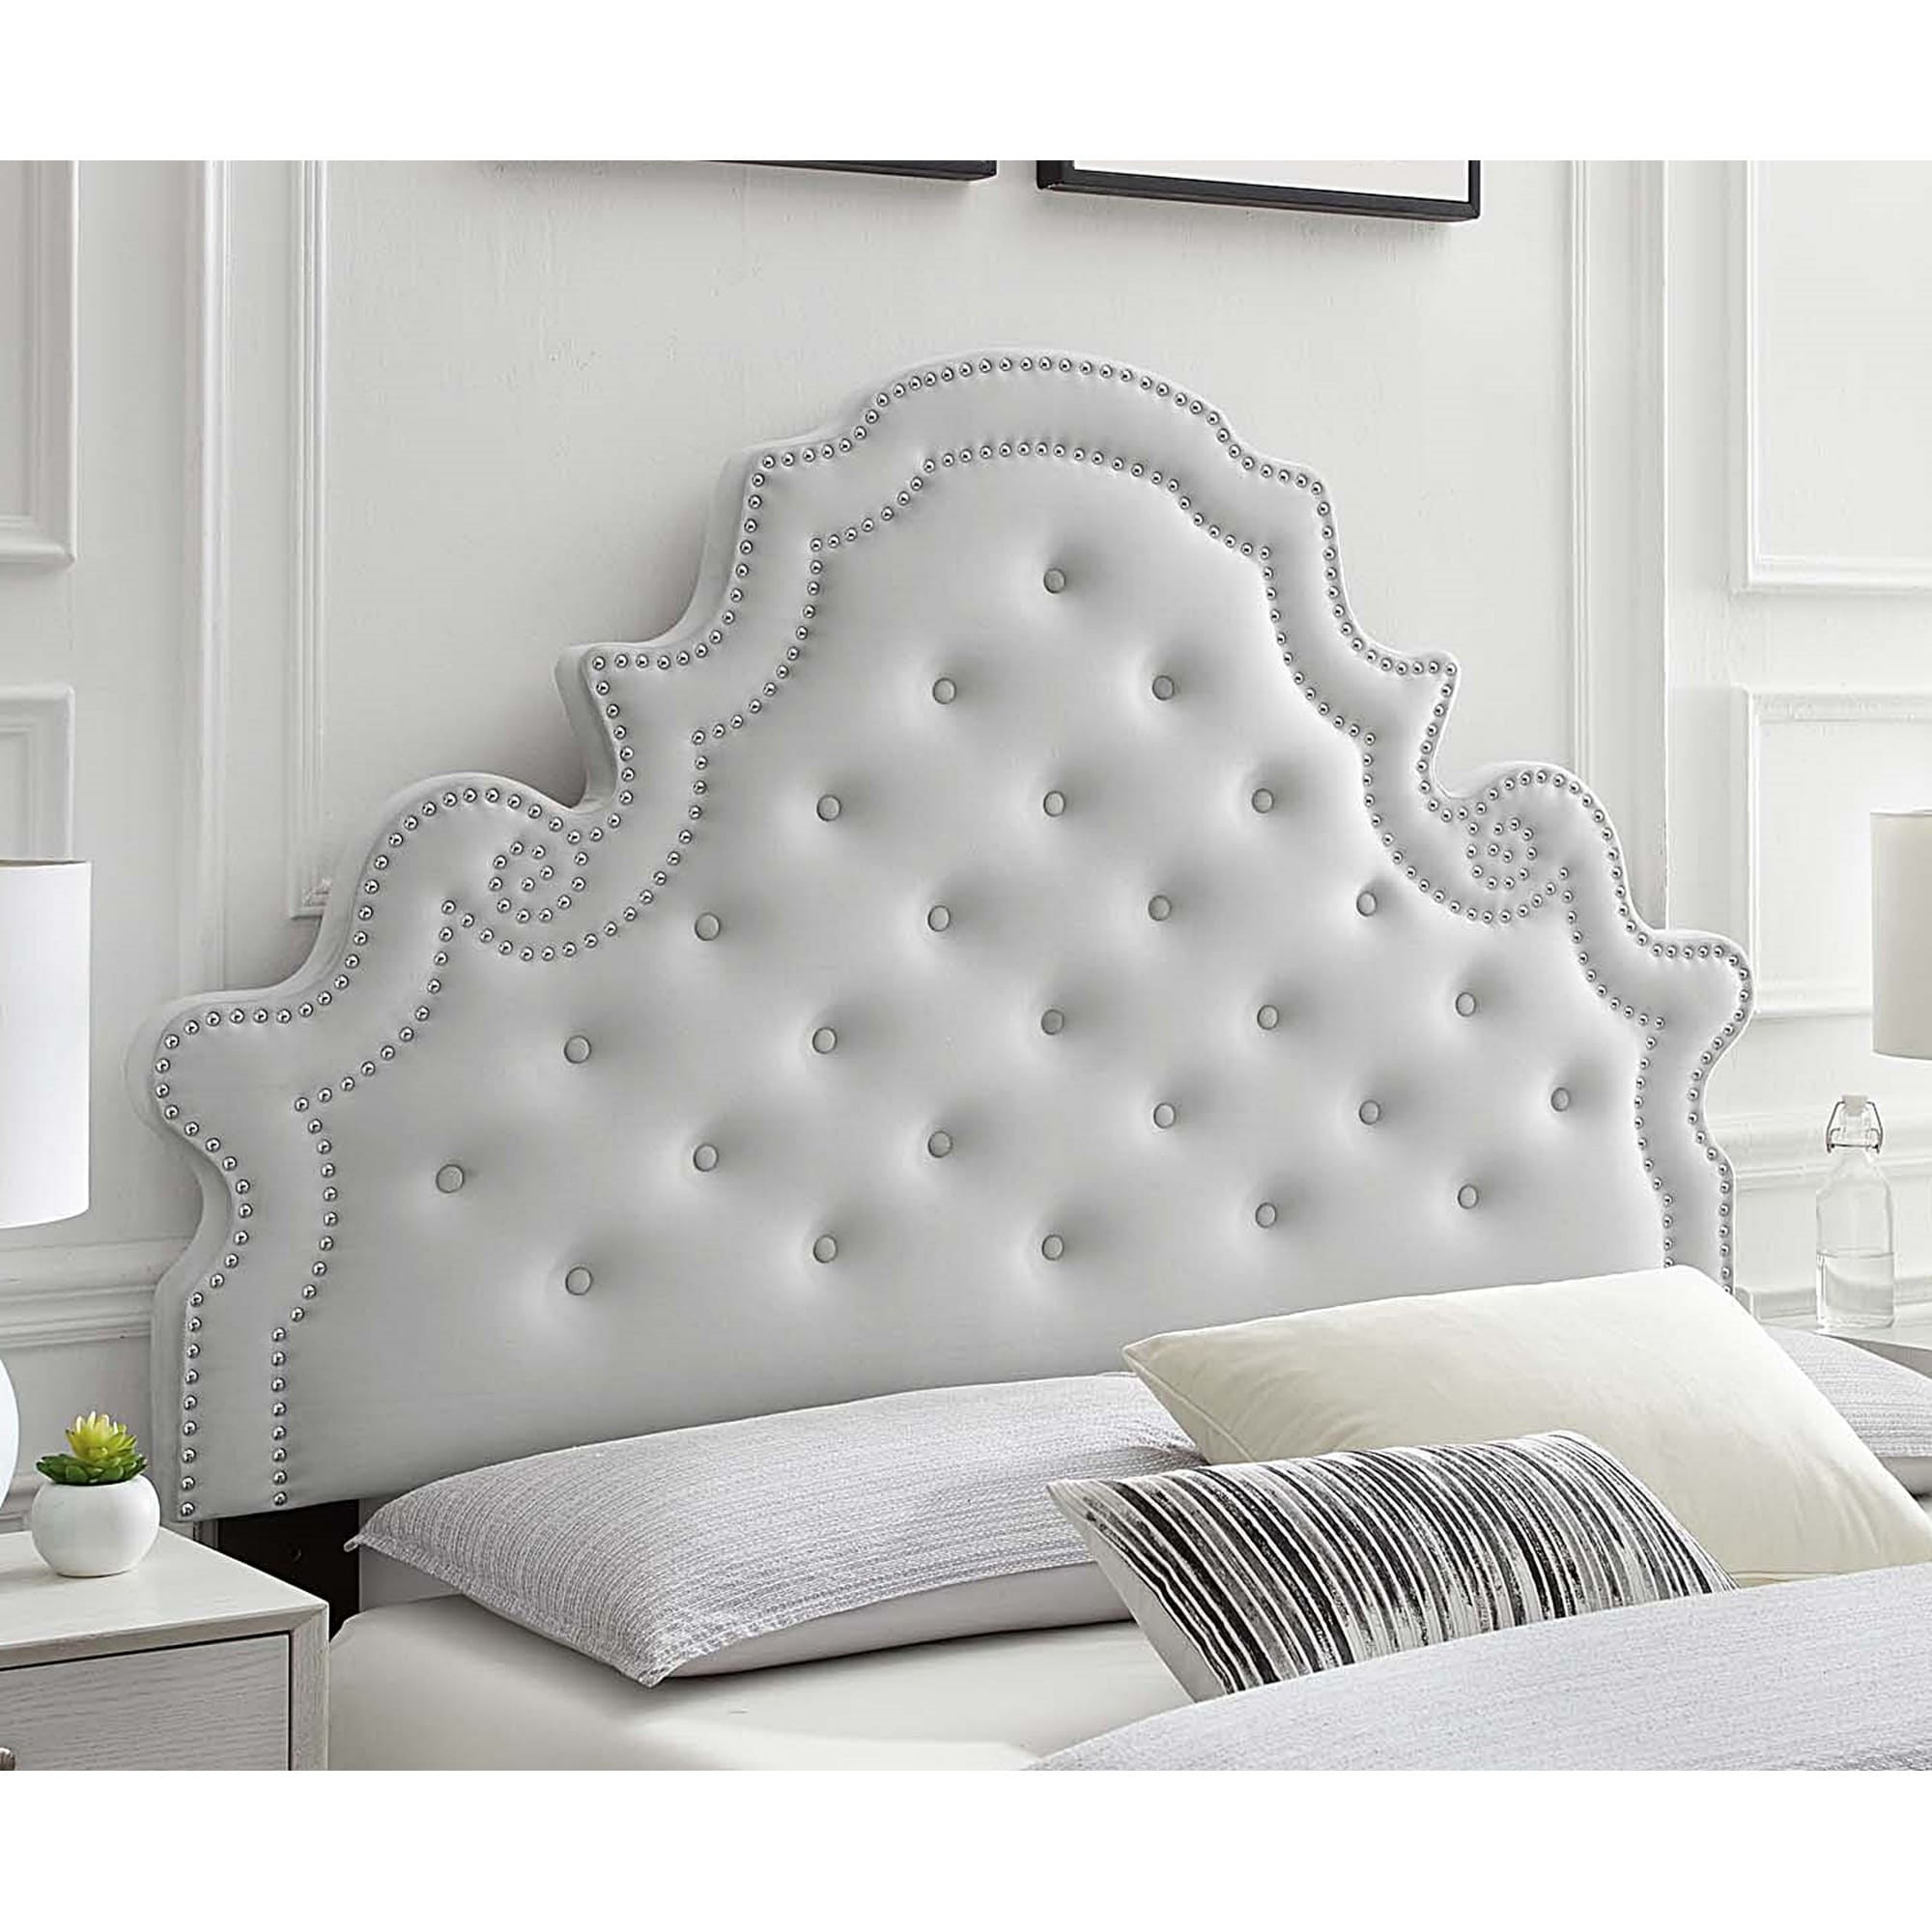 Rounded Upholstered Beige Bed Headboard Padded Tufted in King California King 